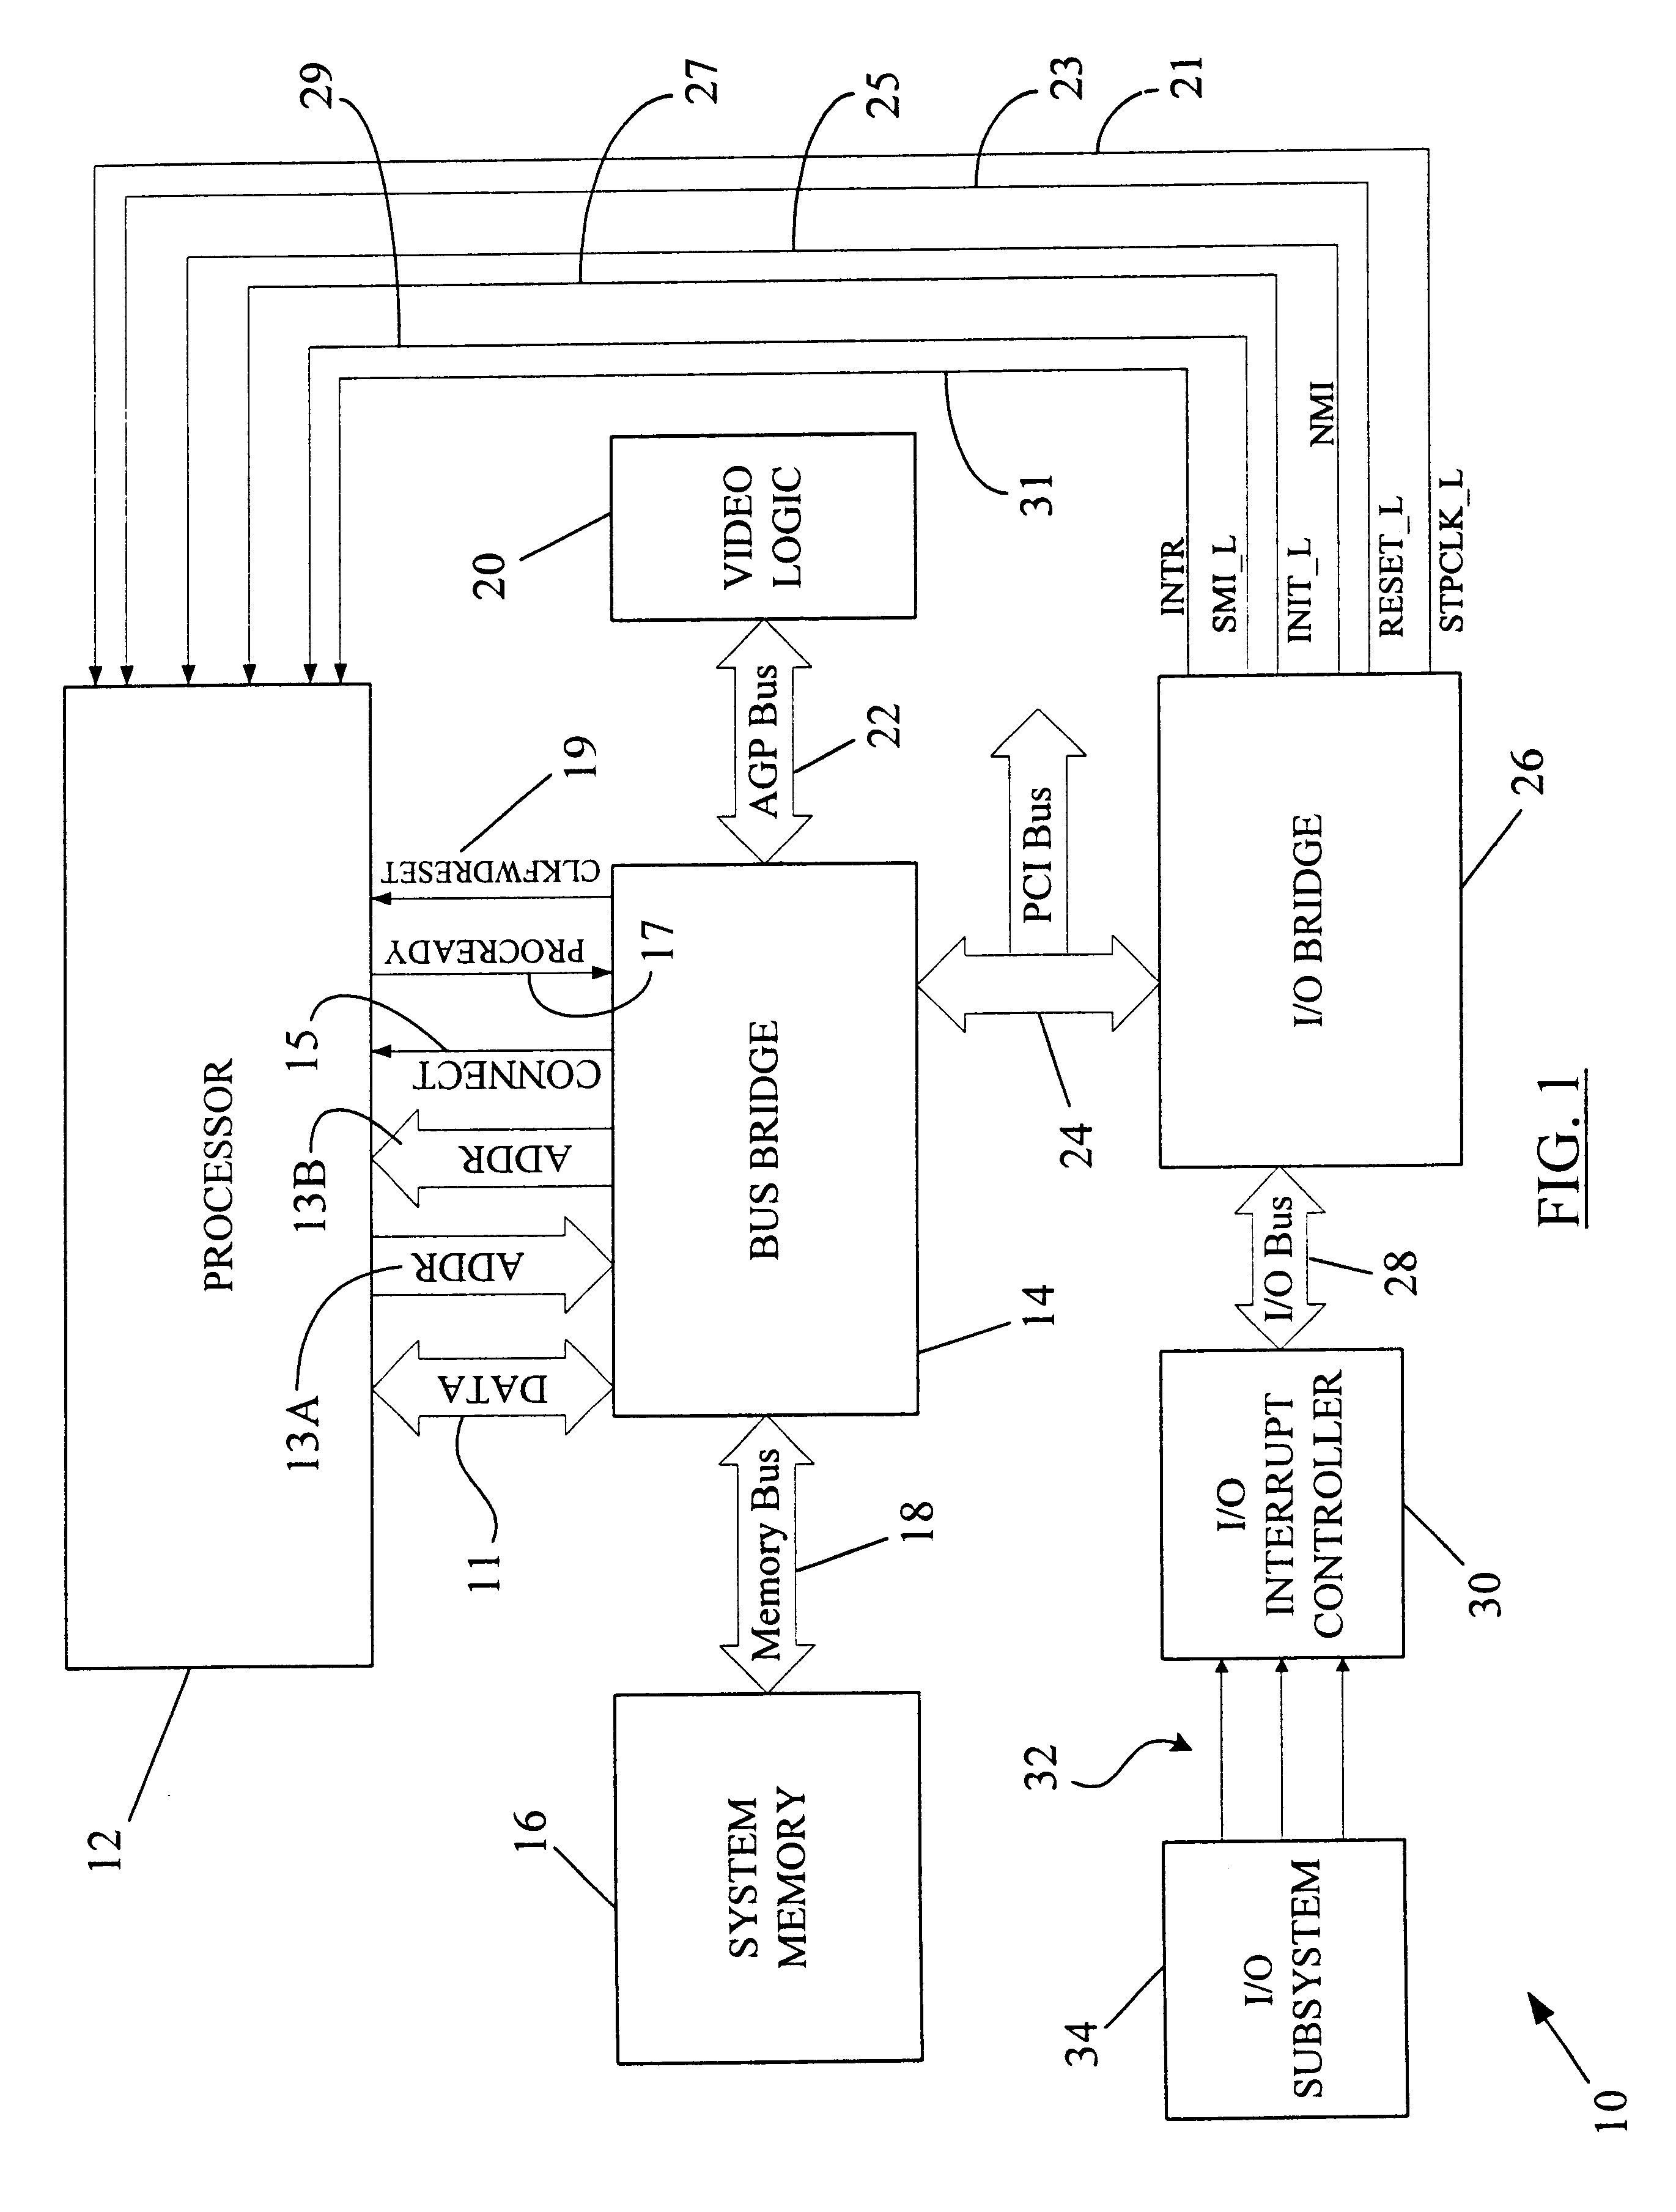 Method and apparatus for controlling power management state transitions between devices connected via a clock forwarded interface